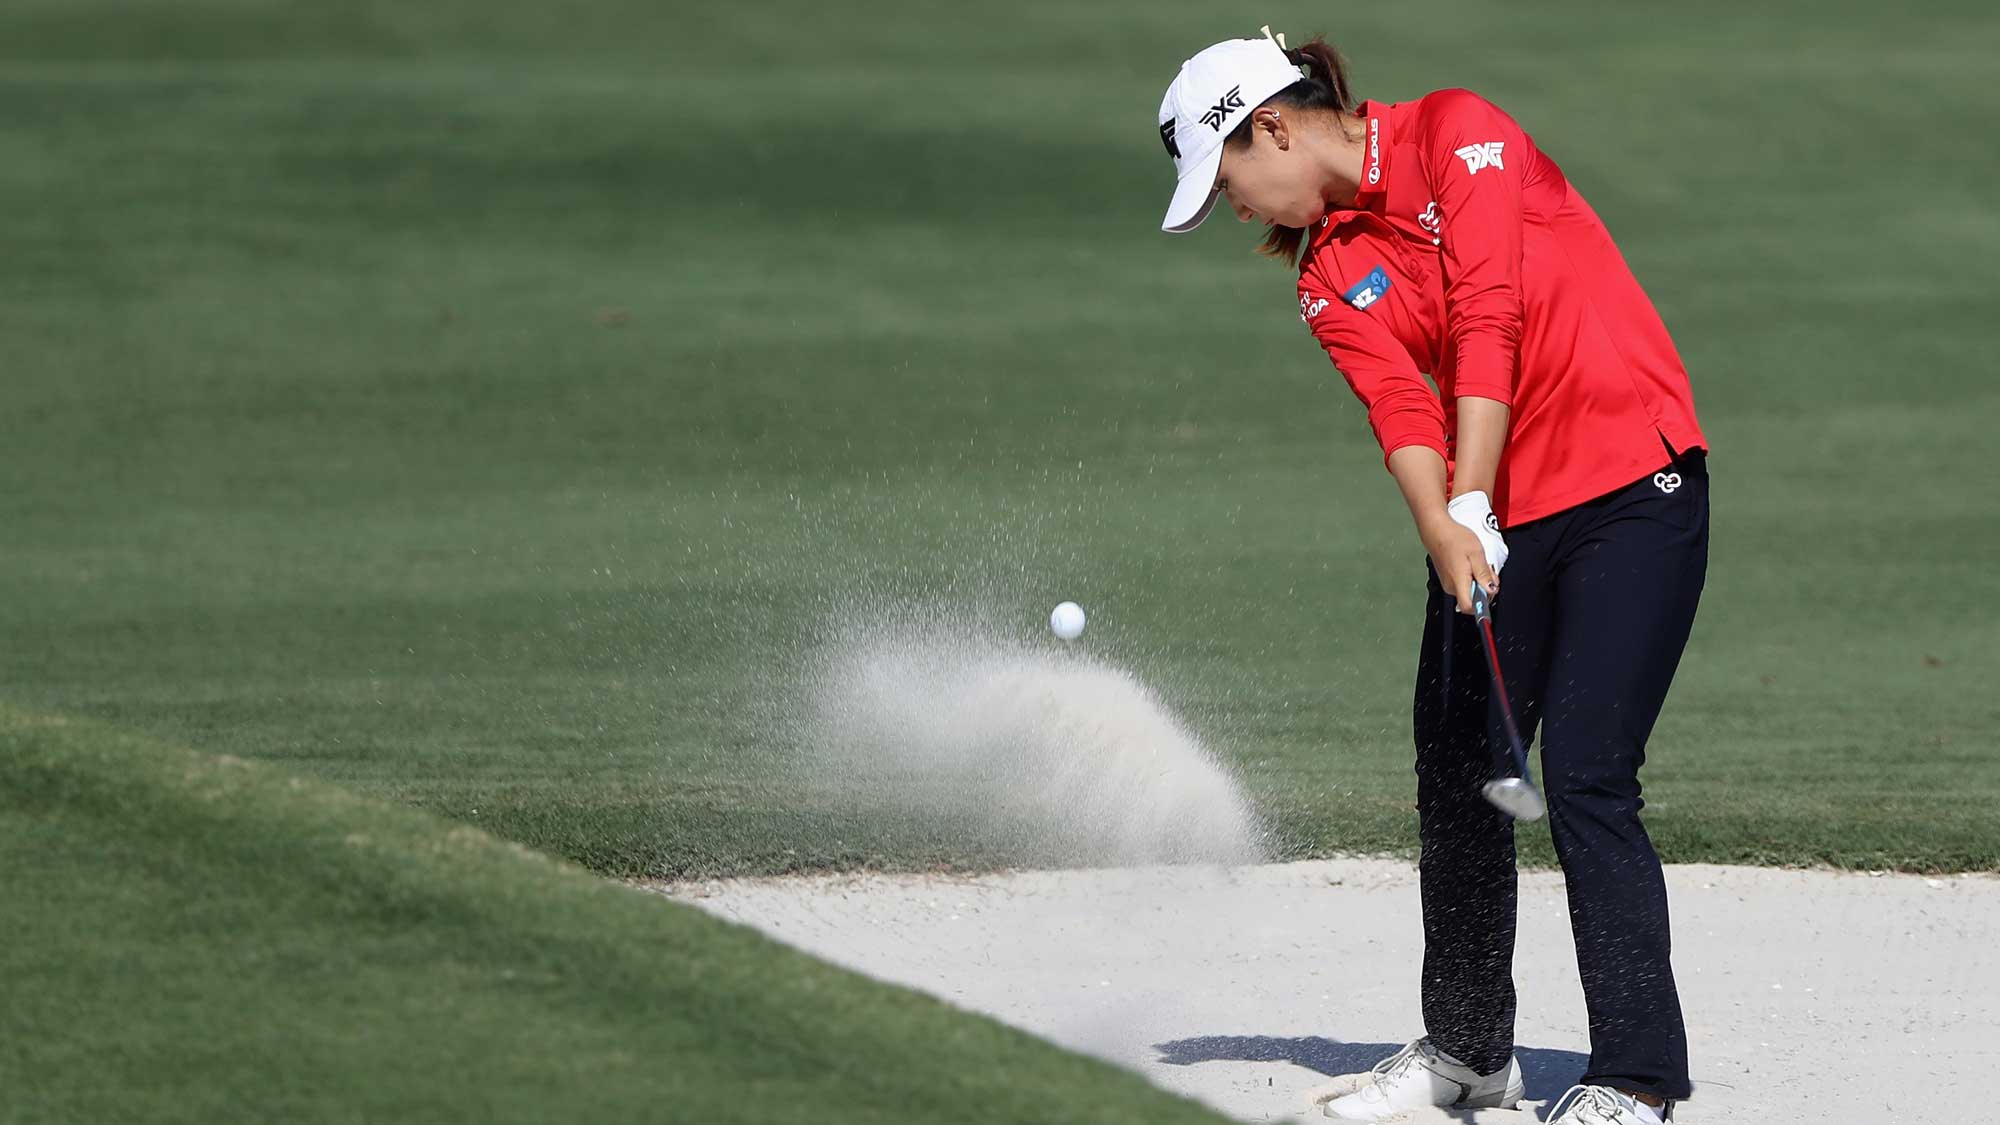 Lydia Ko of New Zealand plays a shot from a bunker on the sixth hole during round two of the CME Group Tour Championship